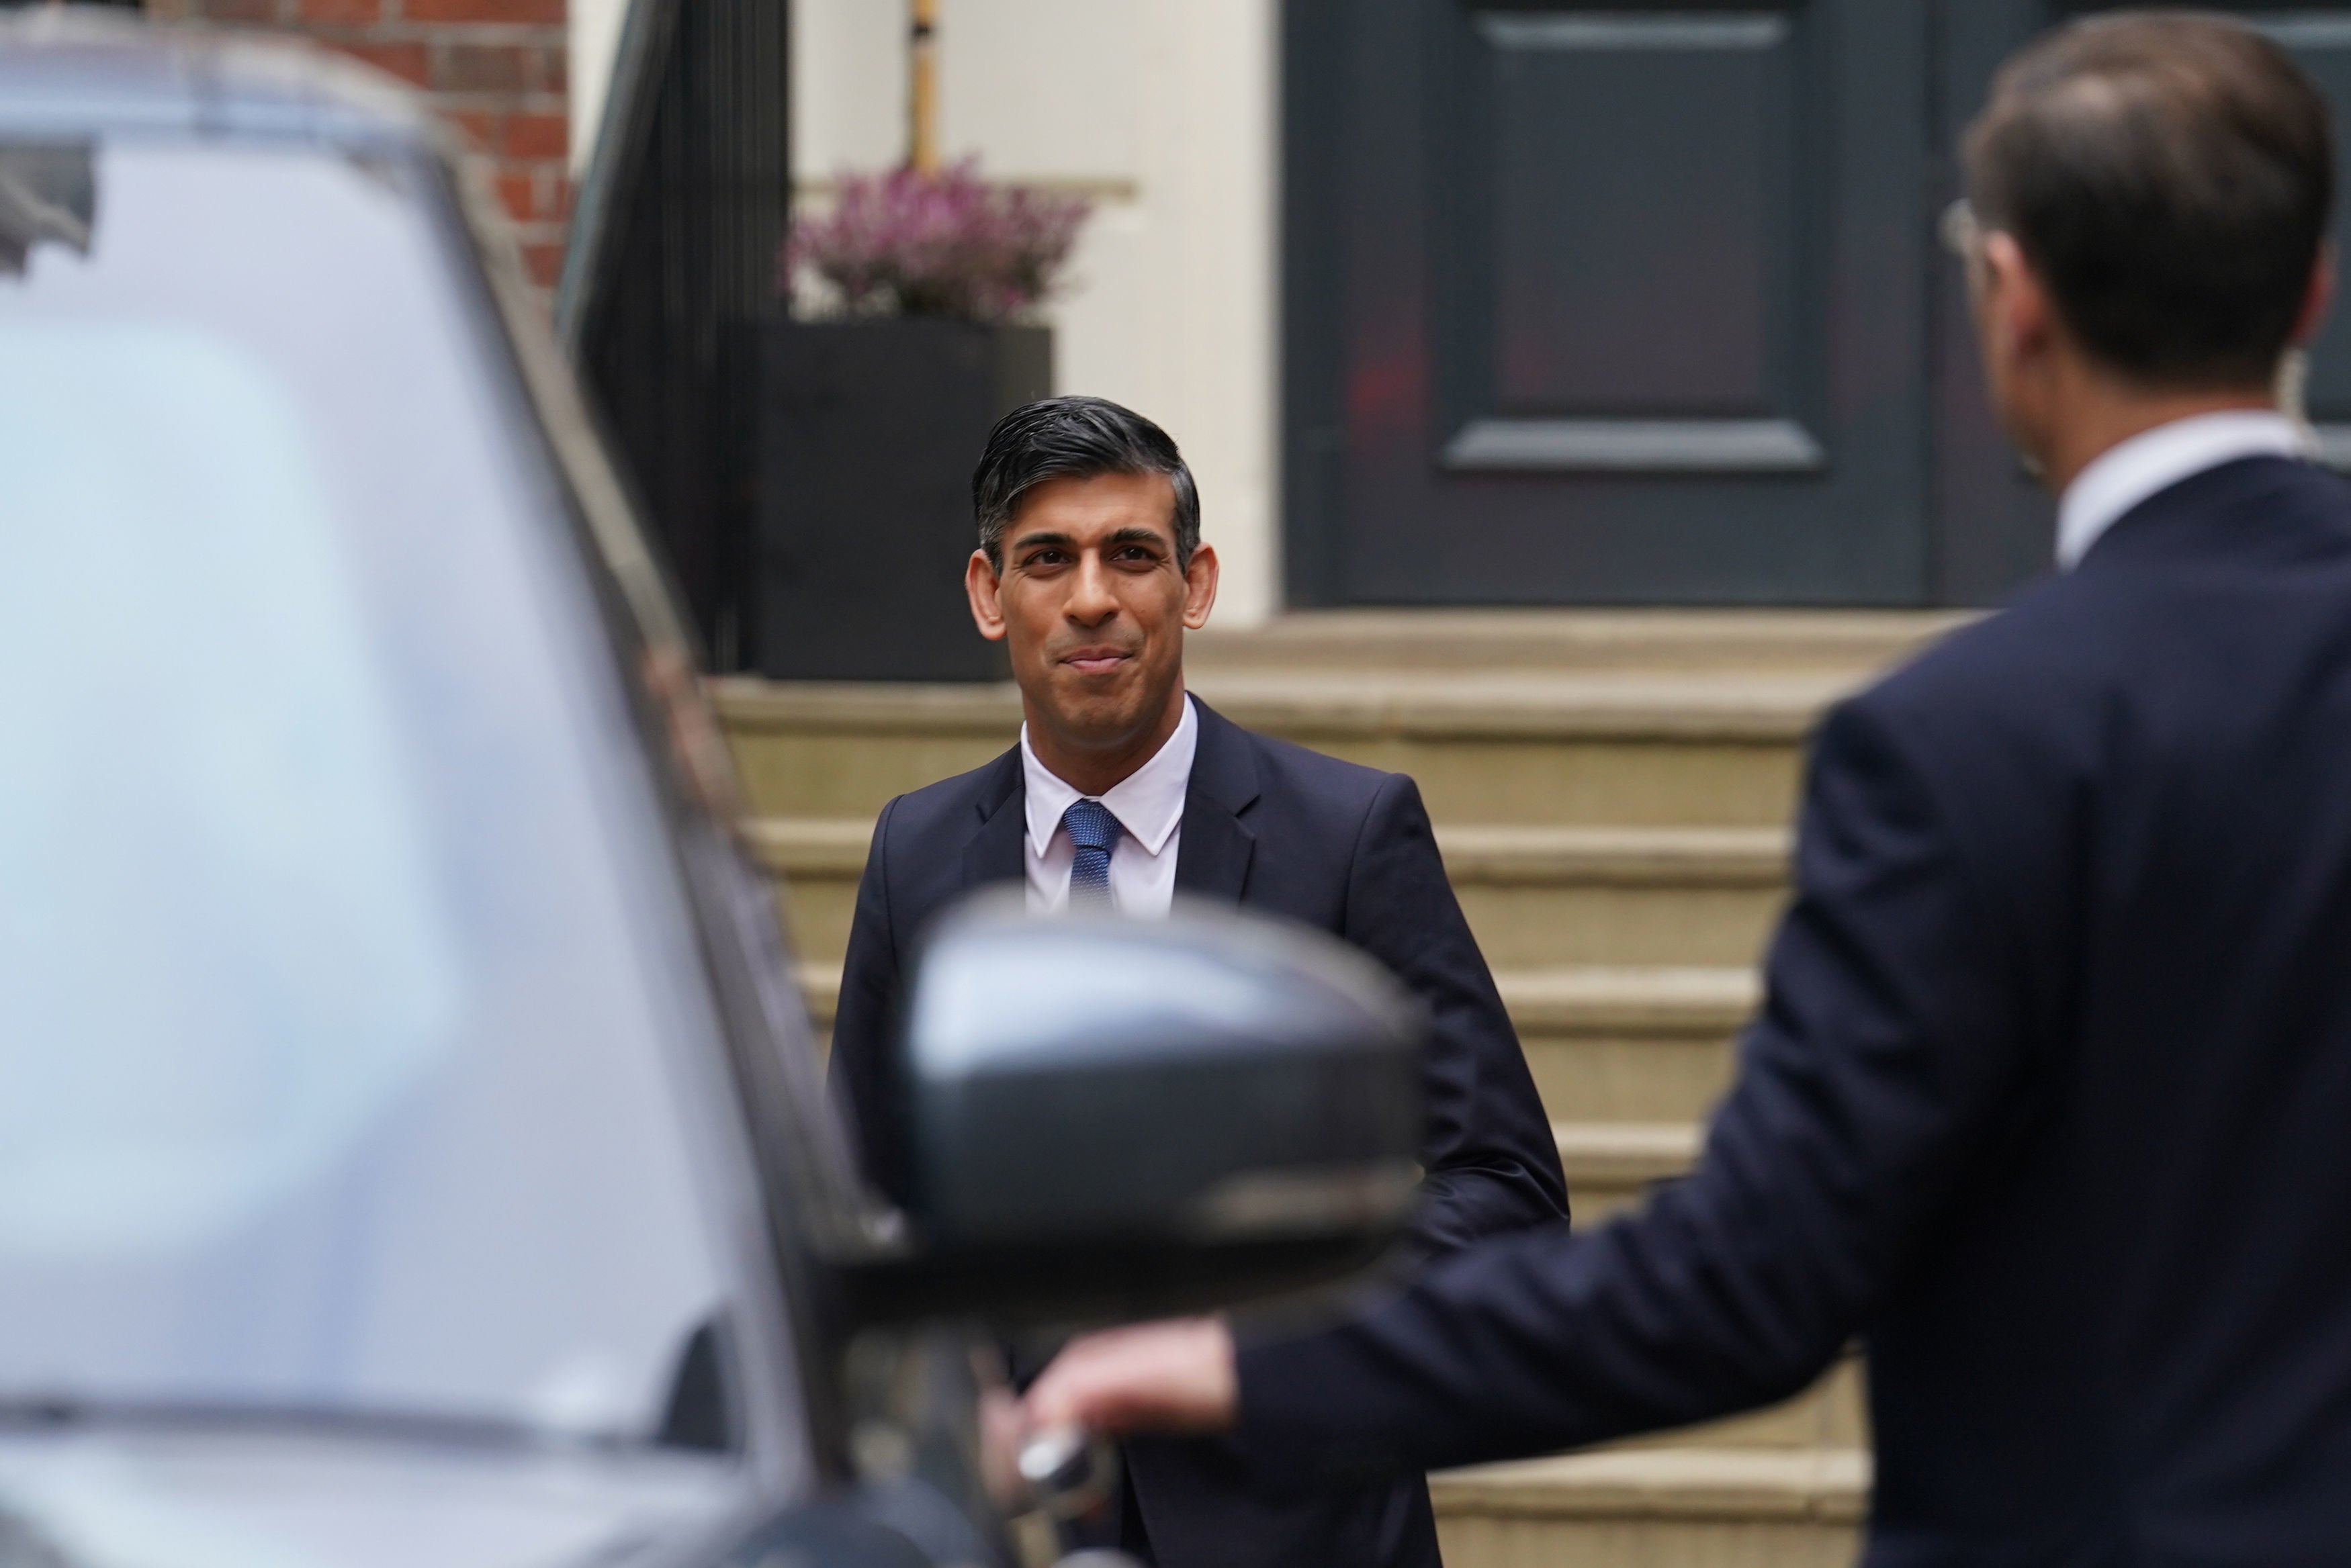 Prime Minister Rishi Sunak leaves the Conservative Party headquarters in central London, after the party suffered council losses in the local elections